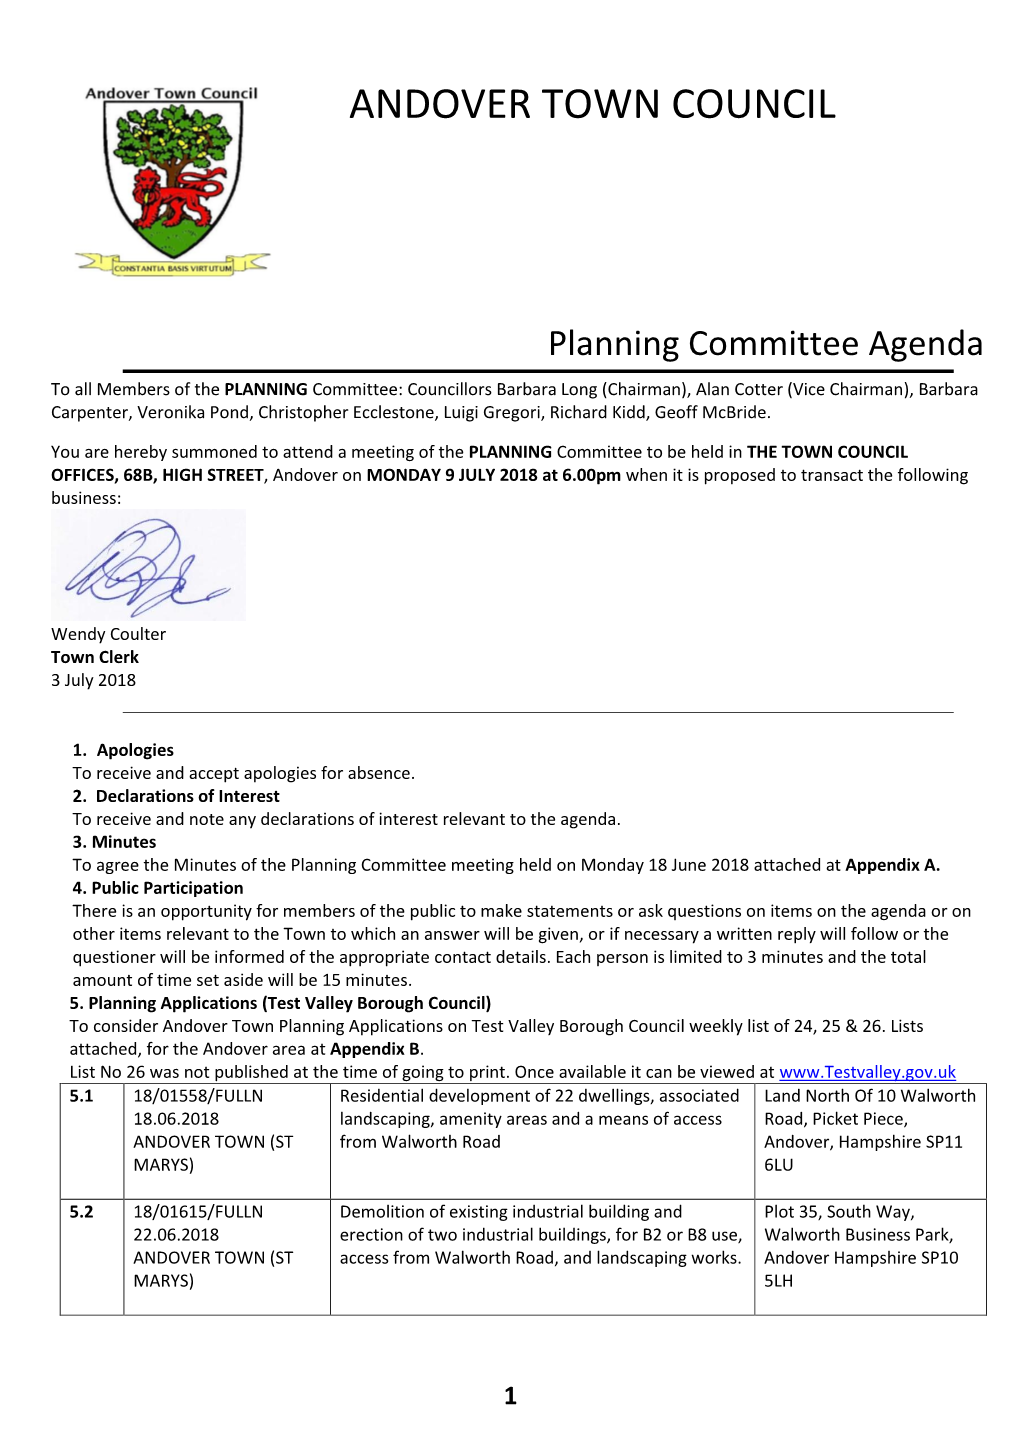 Andover Town Council – Planning Committee